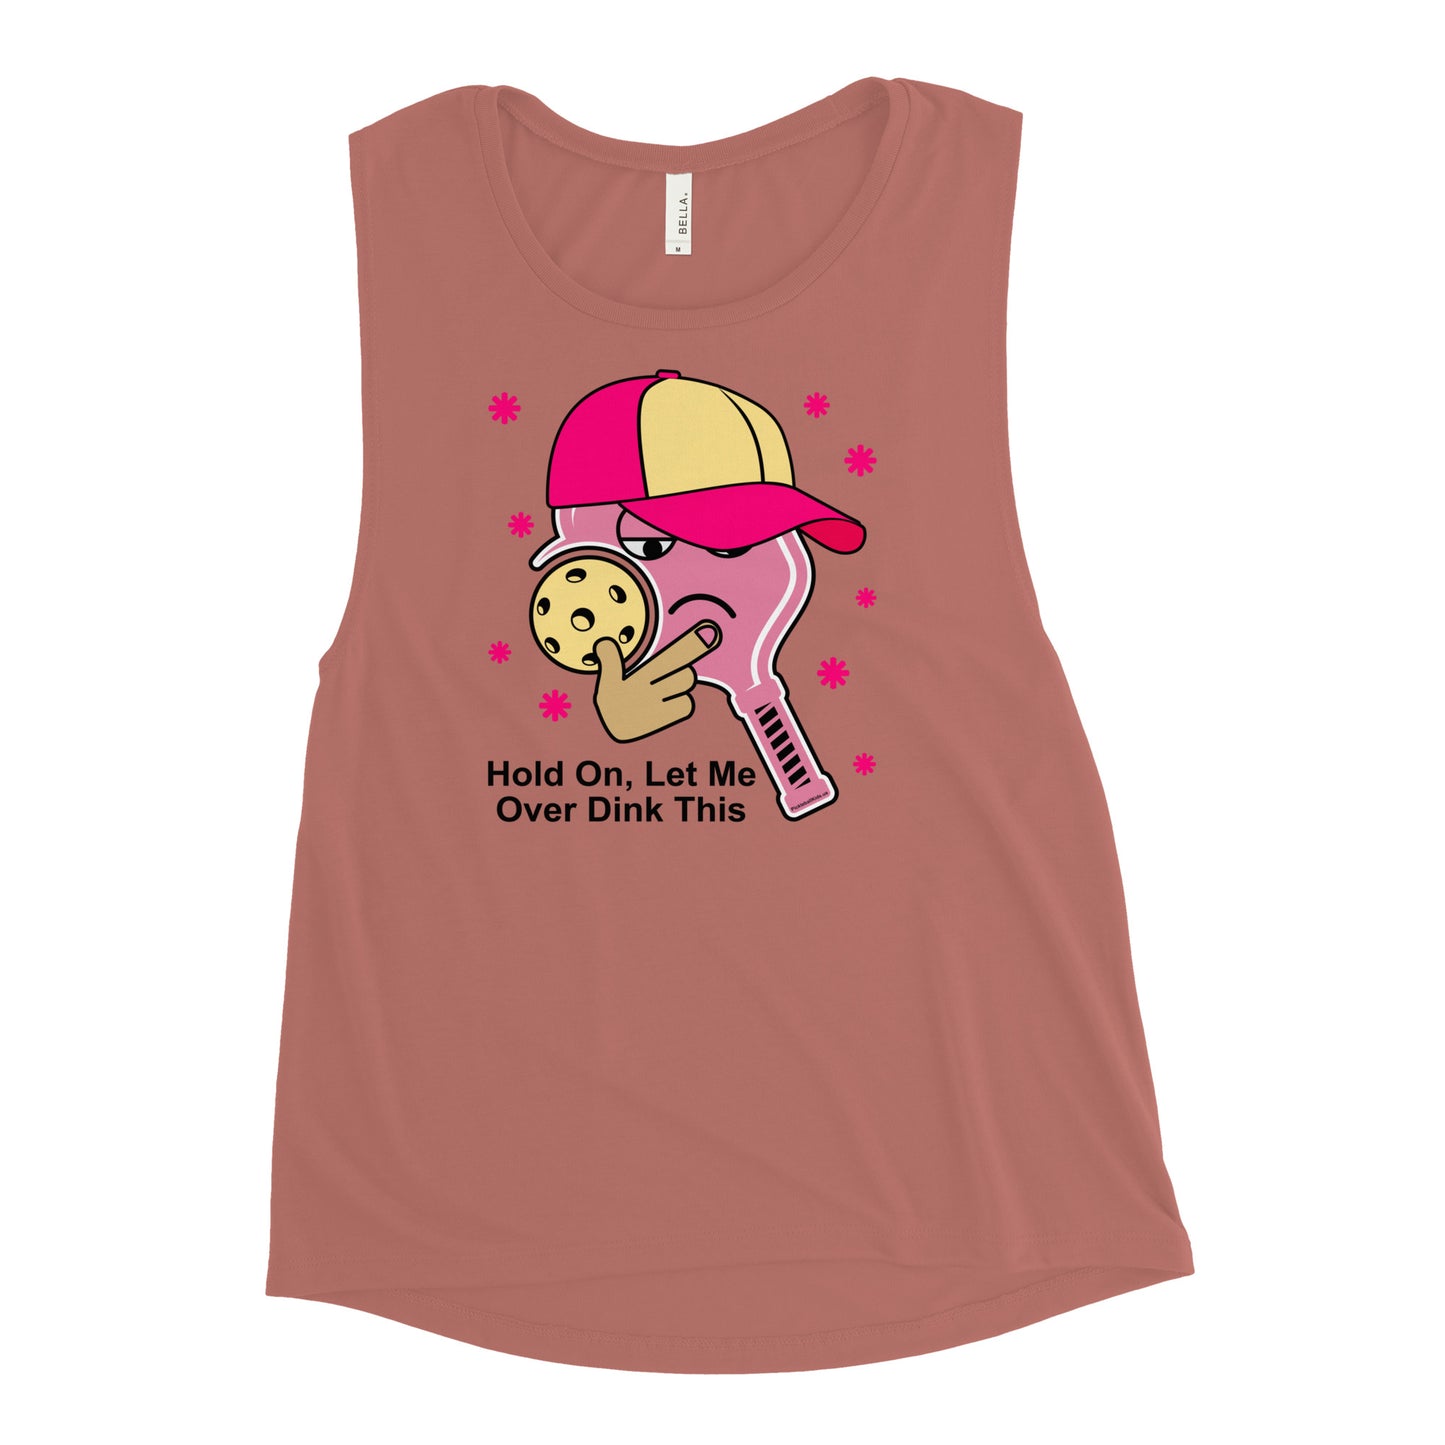 Ladies’  Pickleball Muscle Tank, "Hold On Let Me Over Dink This."